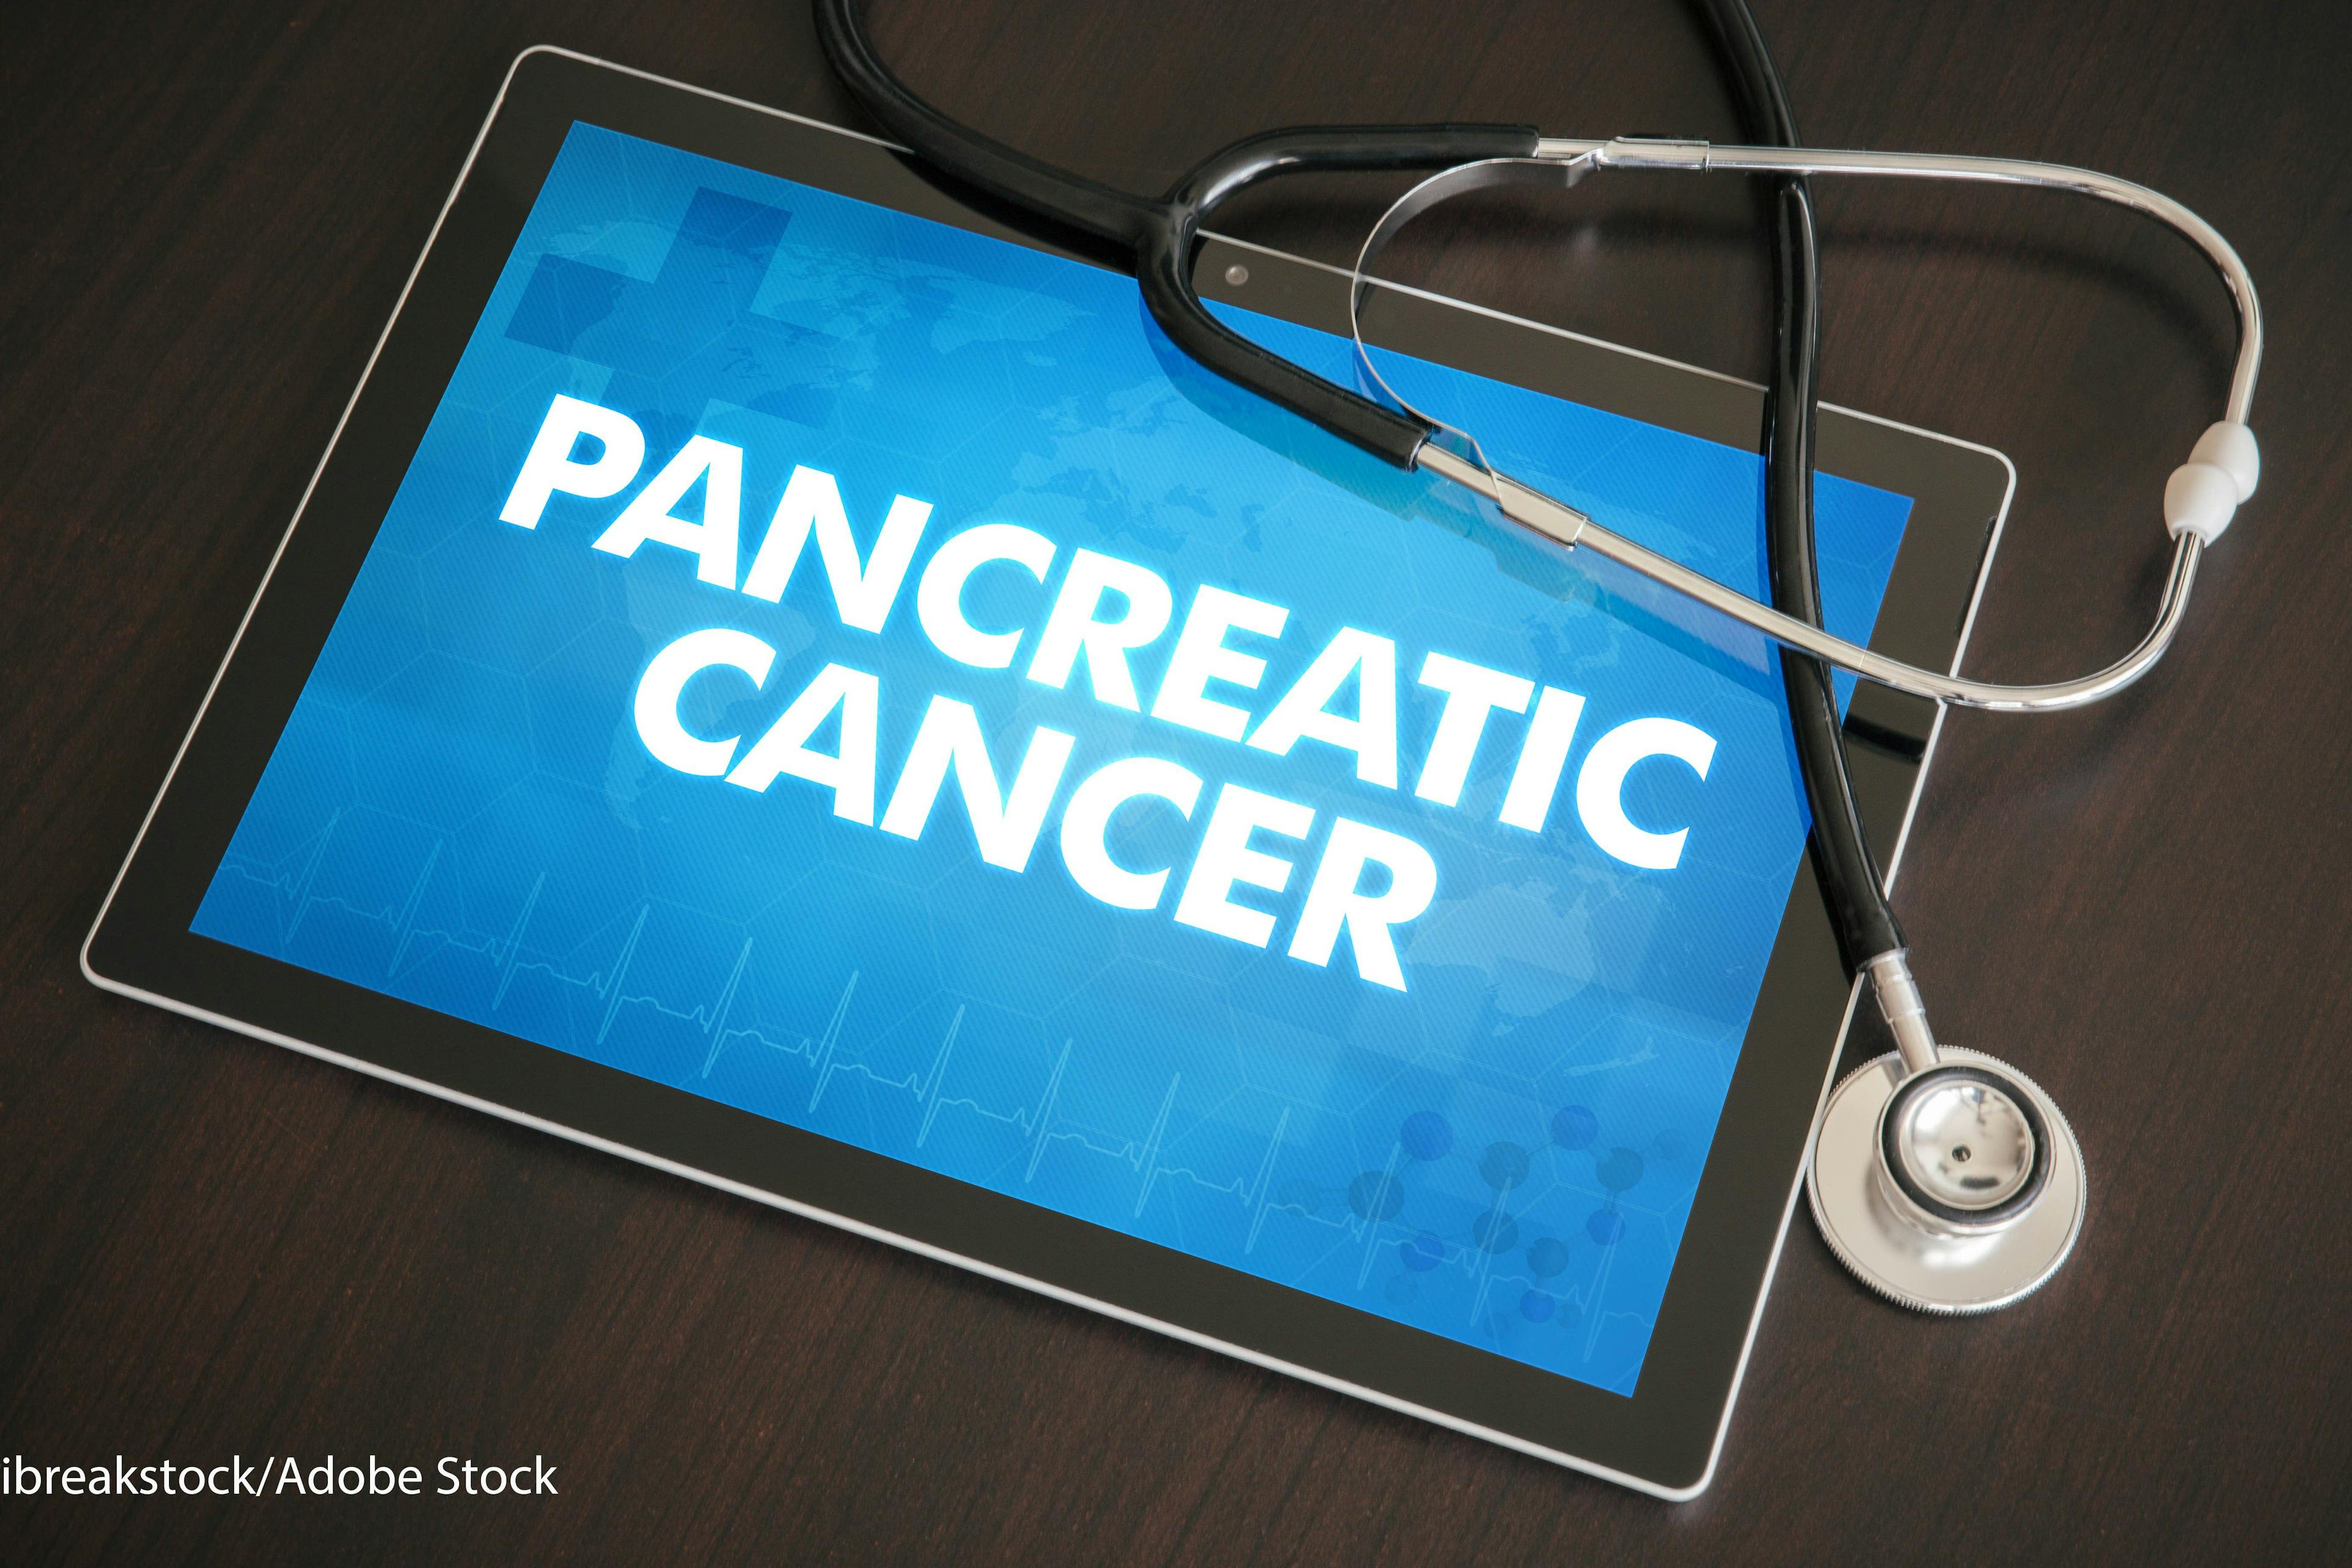 Pancreatic Cancer Screening in Asymptomatic Adults Still Not Recommended